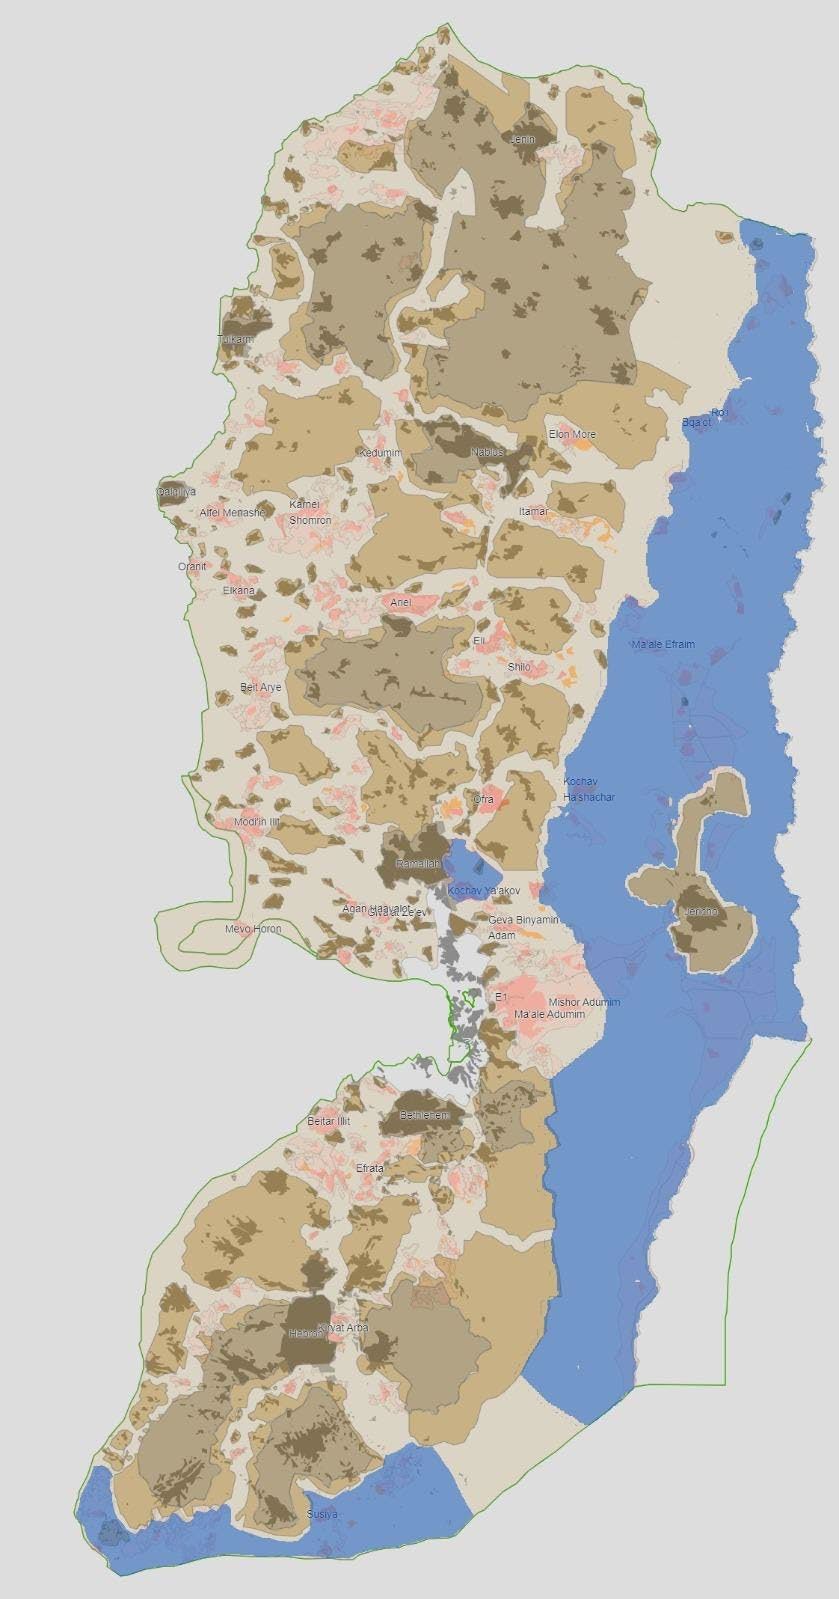 BRISMES Issues Grave Warning: Danger of Massive Ethnic Cleansing of Palestinians in the West Bank